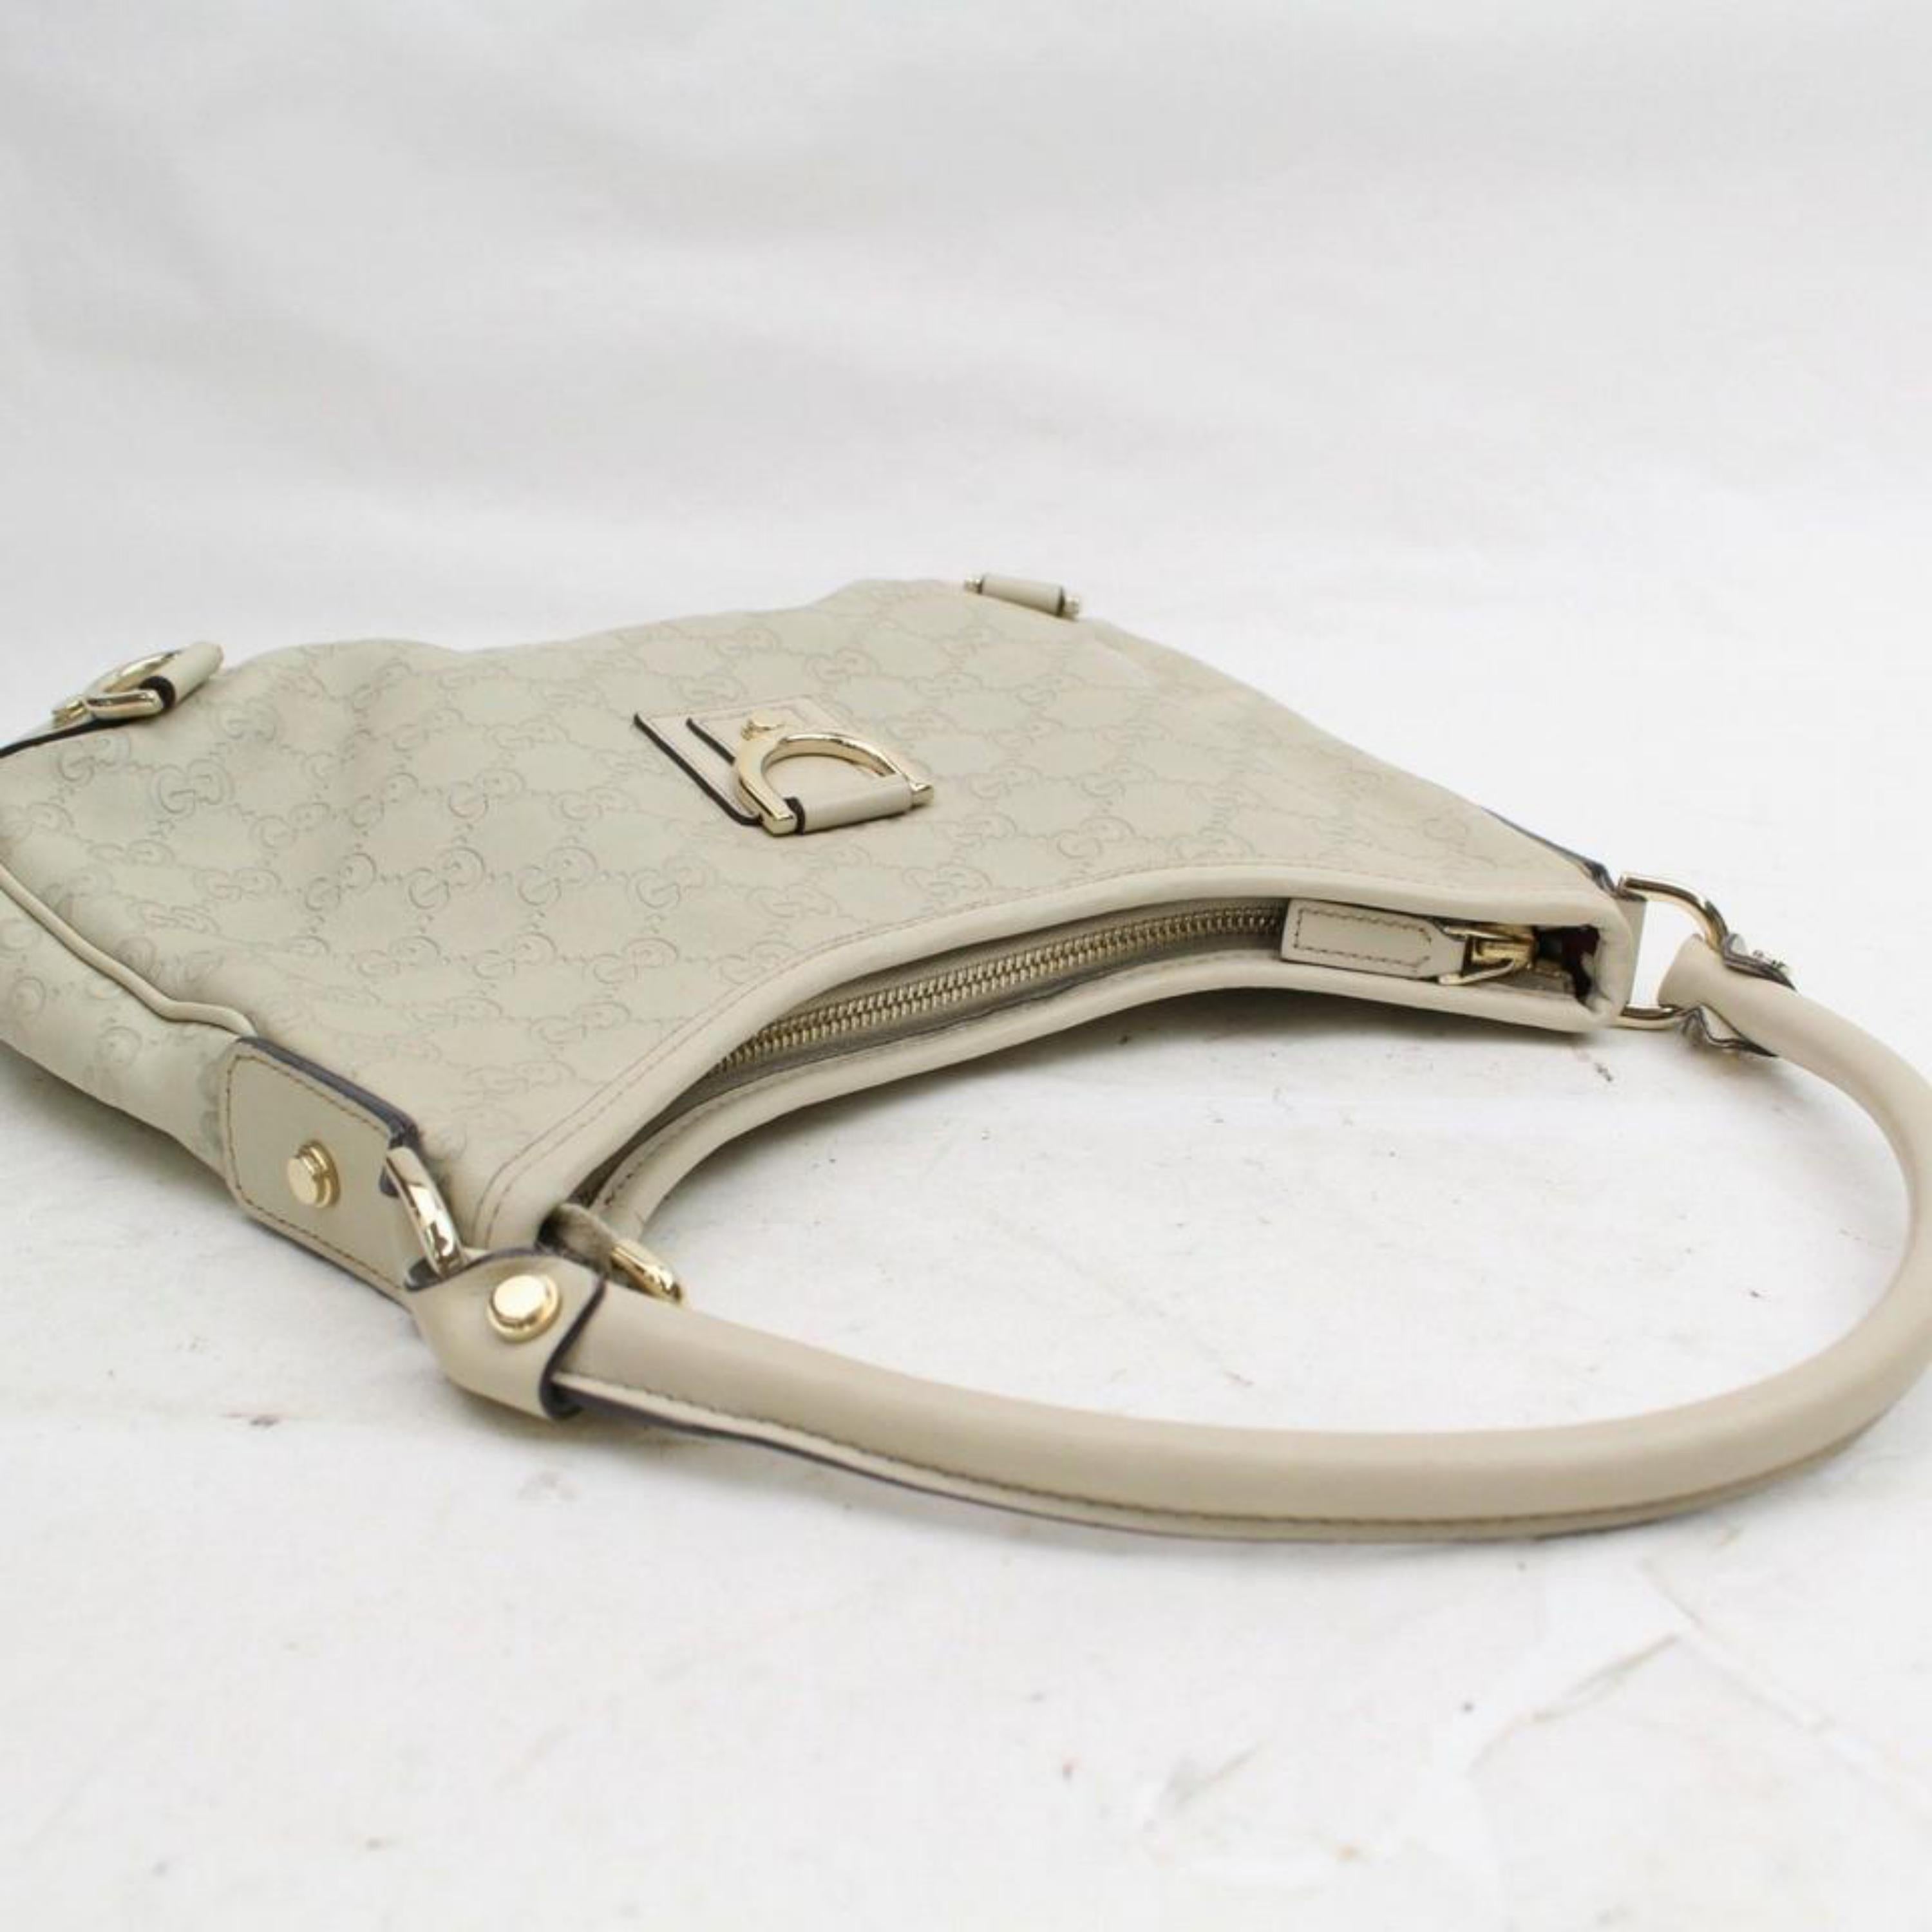 Gucci Ivory Guccissima D Ring Hobo 868308 Cream Leather Shoulder Bag For Sale 5